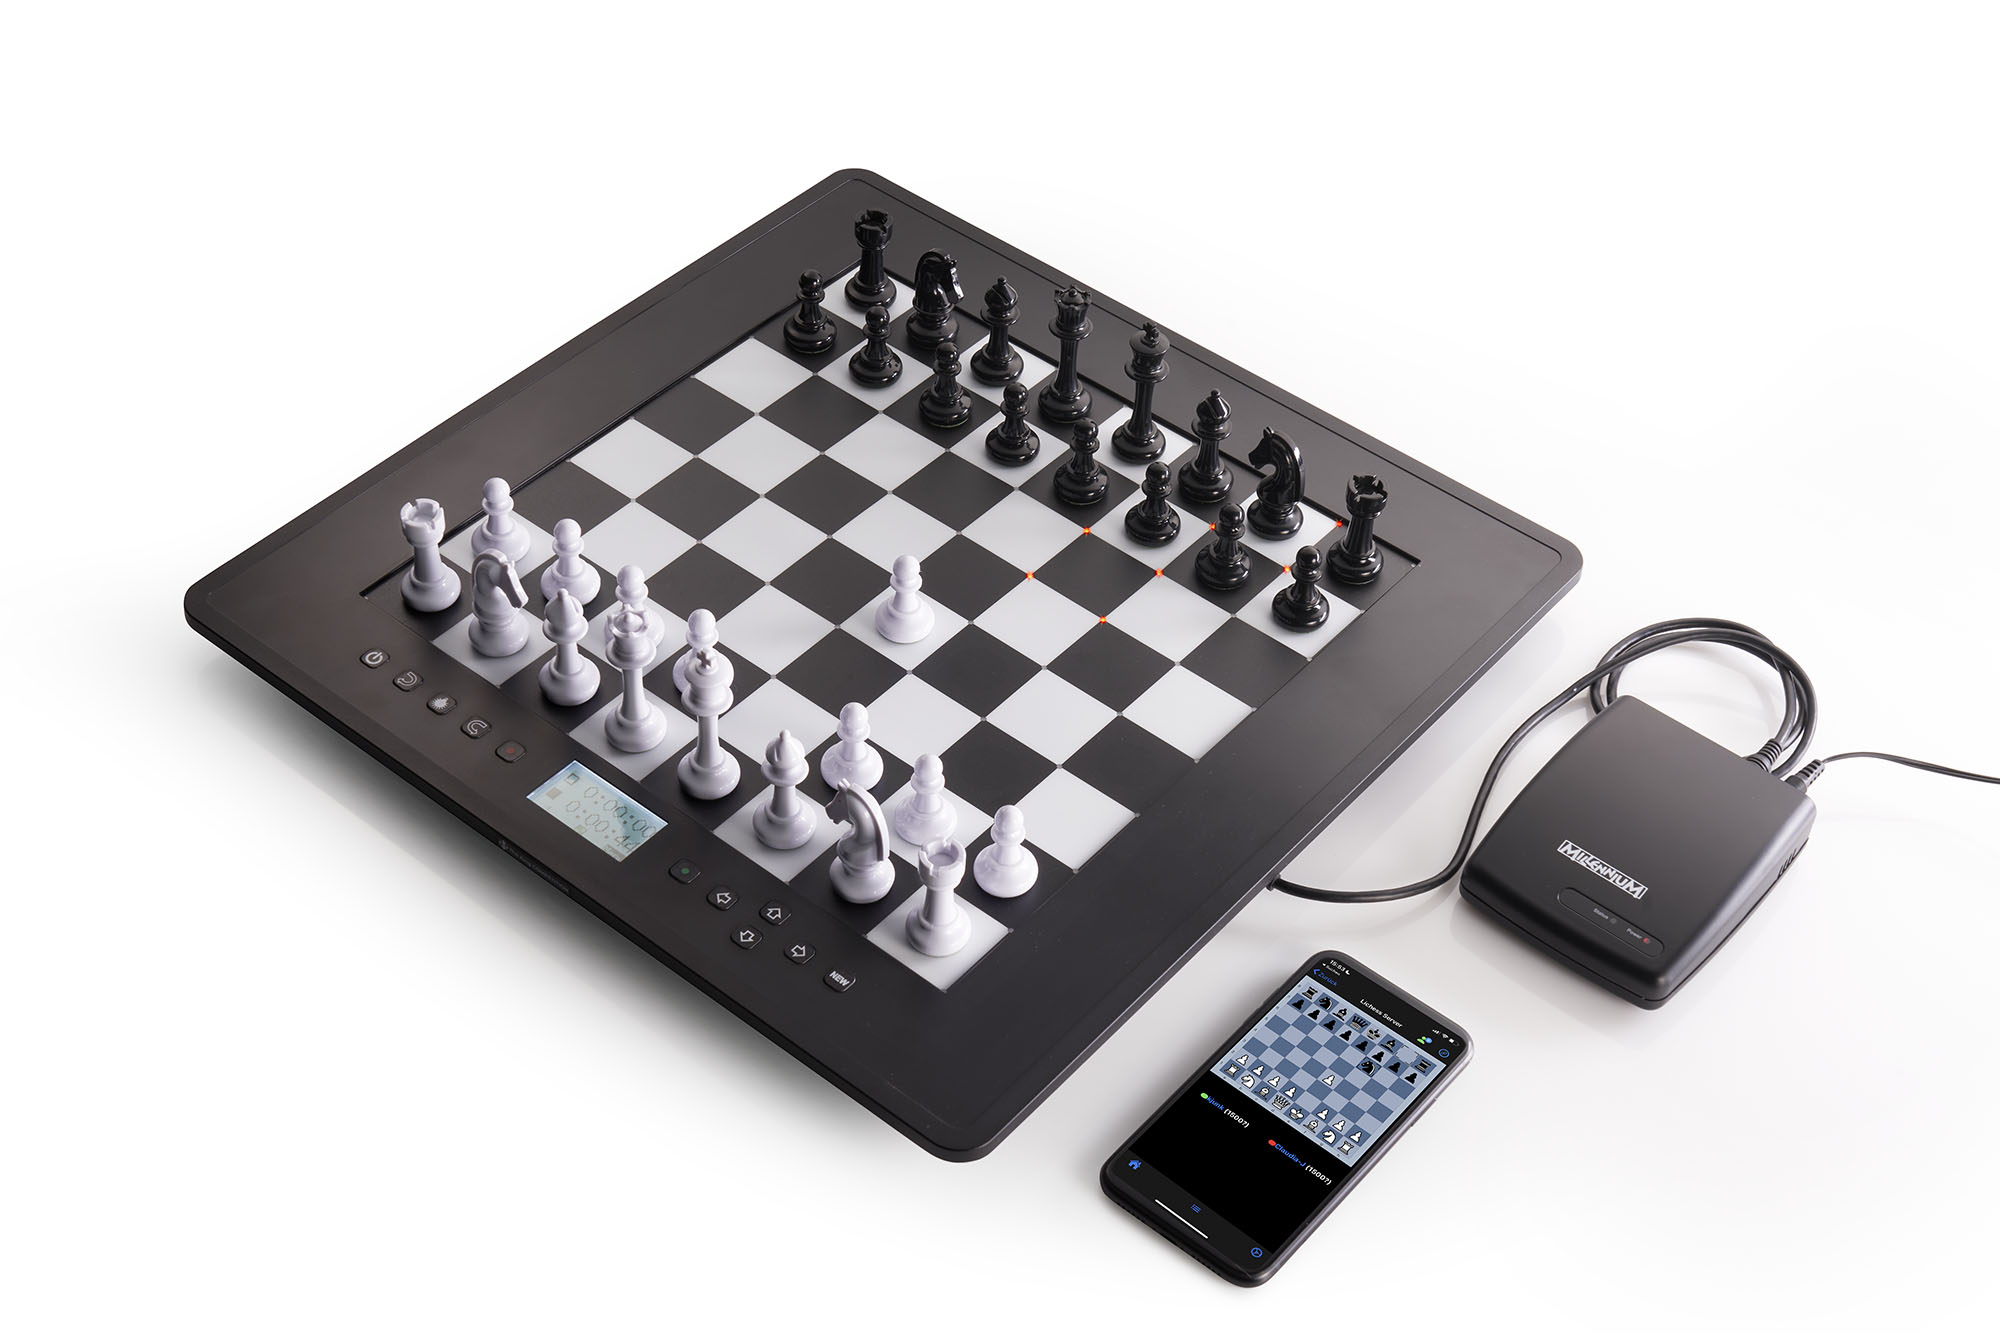 Millennium Chess Computer - The King Competition – Chess House